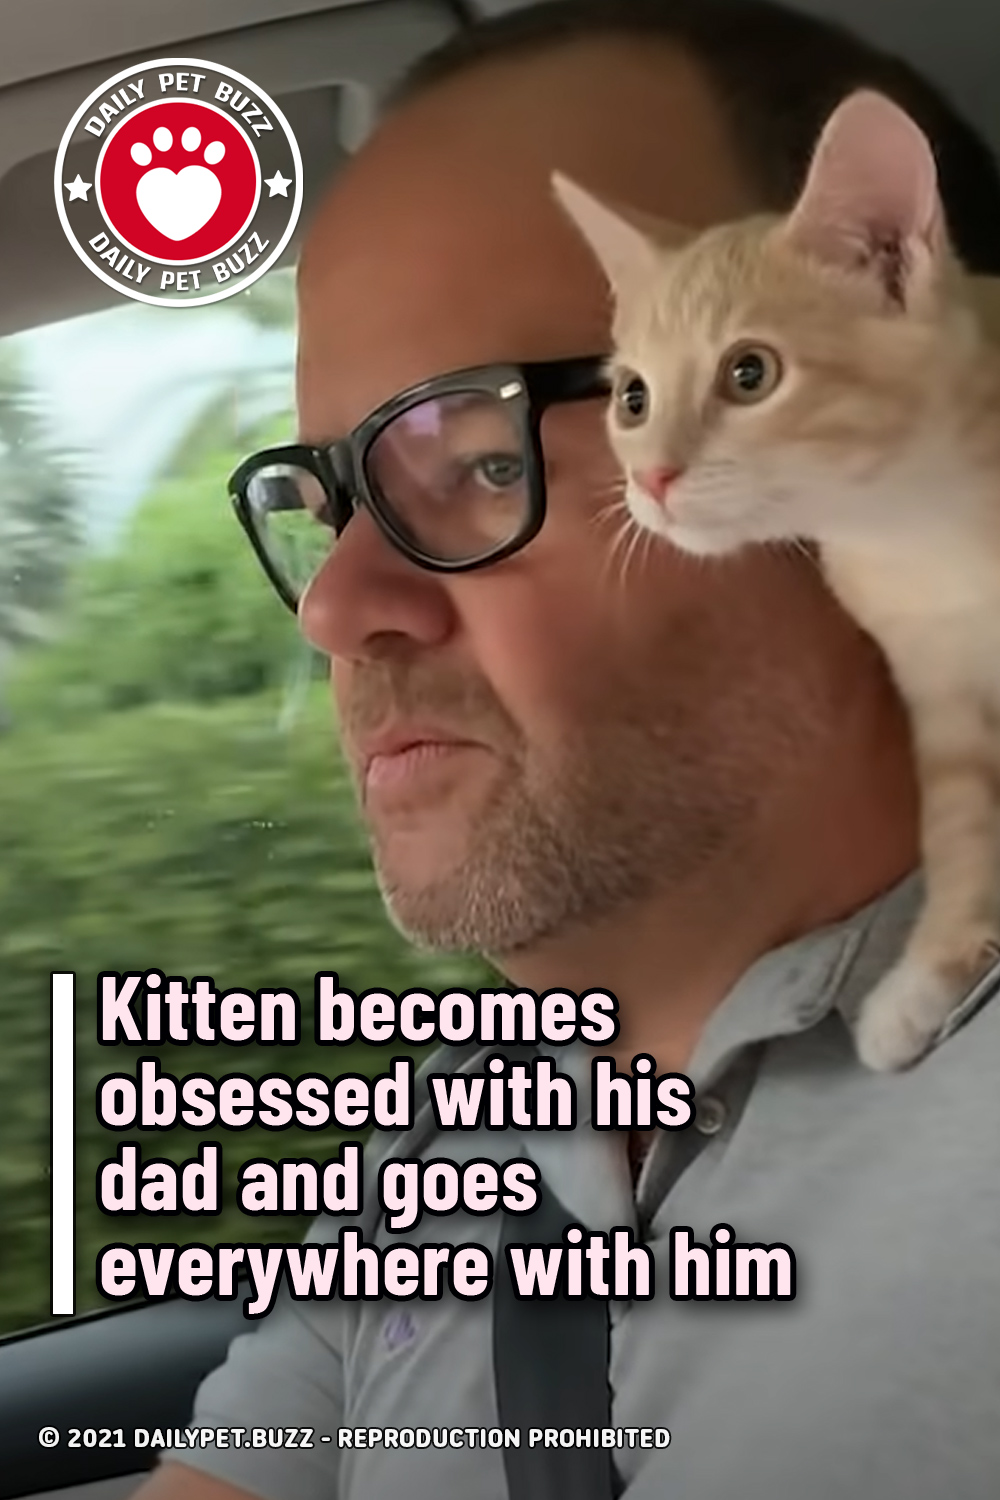 Kitten becomes obsessed with his dad and goes everywhere with him